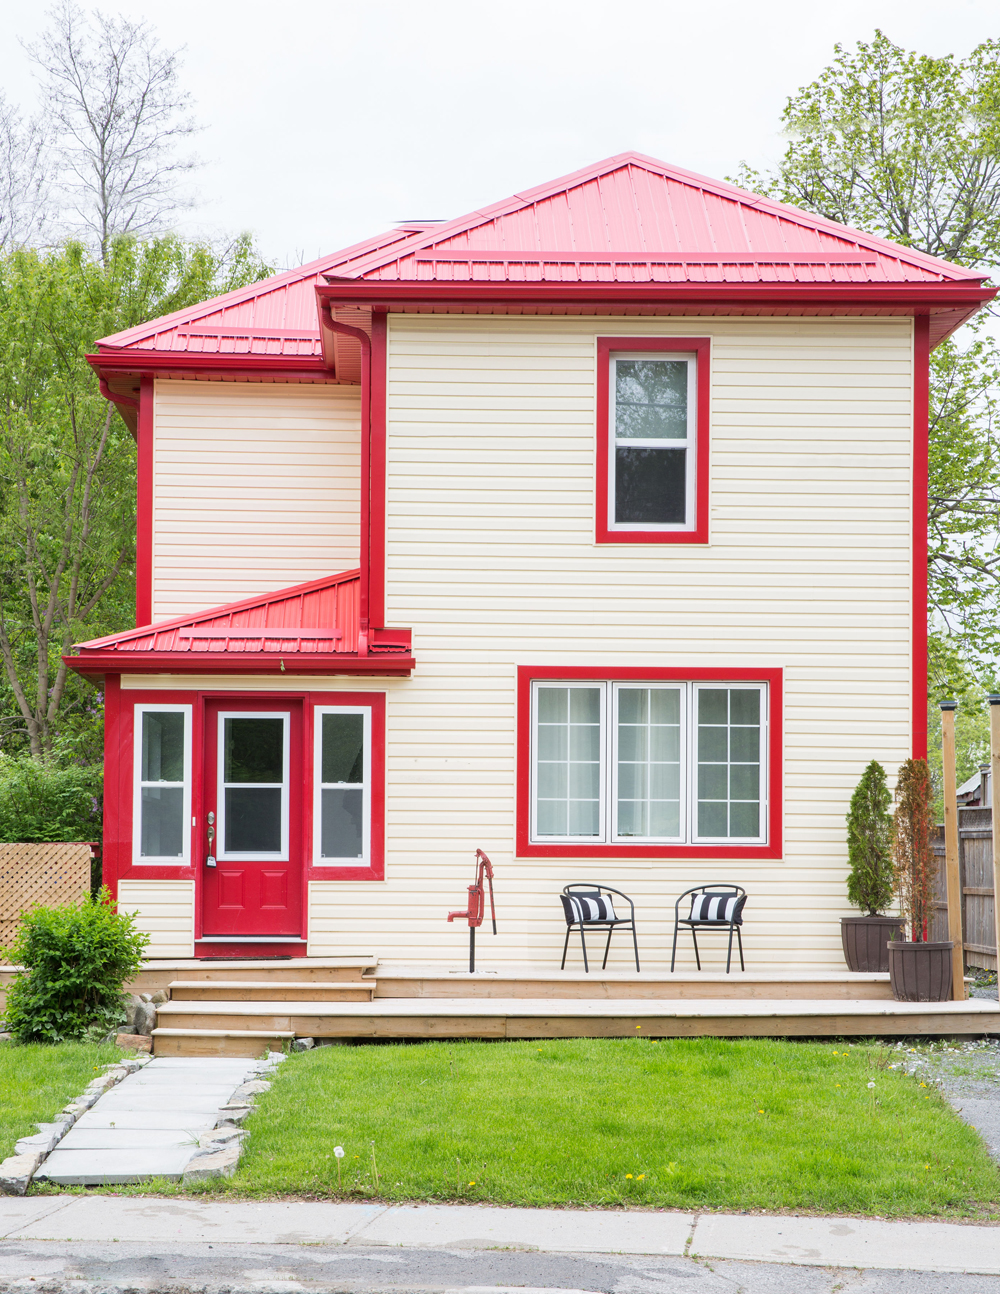 tan siding house exterior with red trim and front lawn